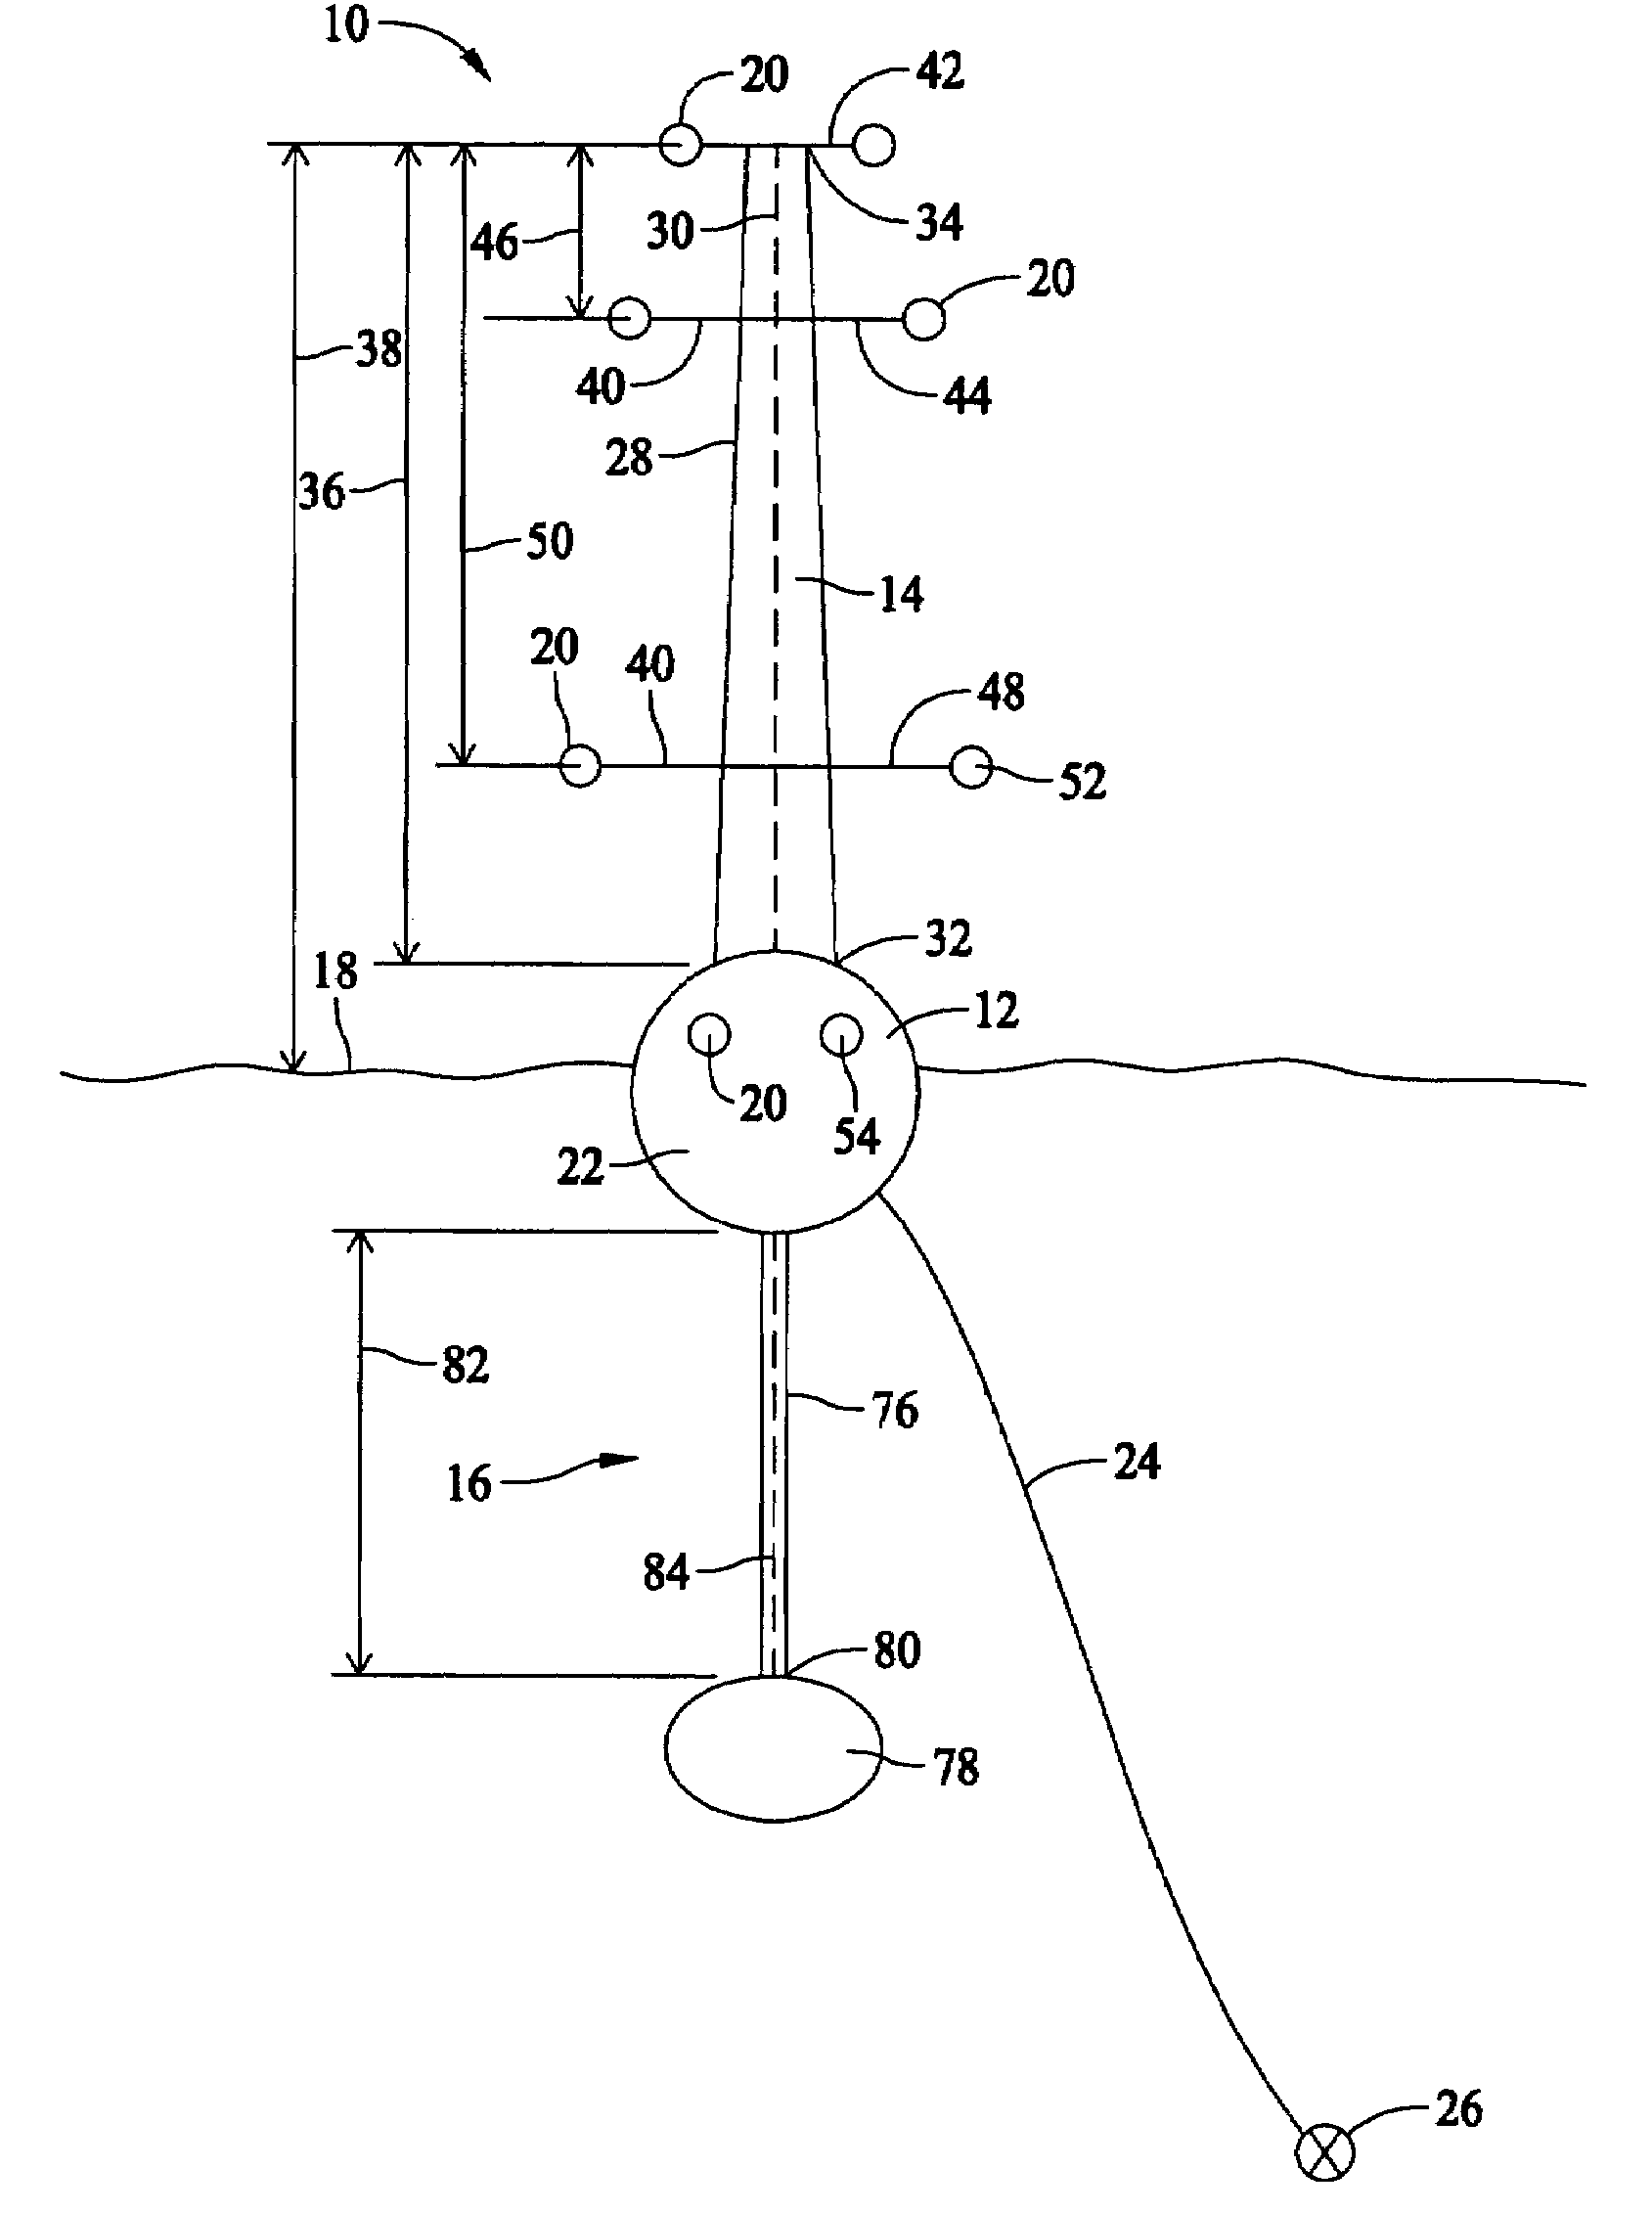 Method and apparatus for determining a site for an offshore wind turbine